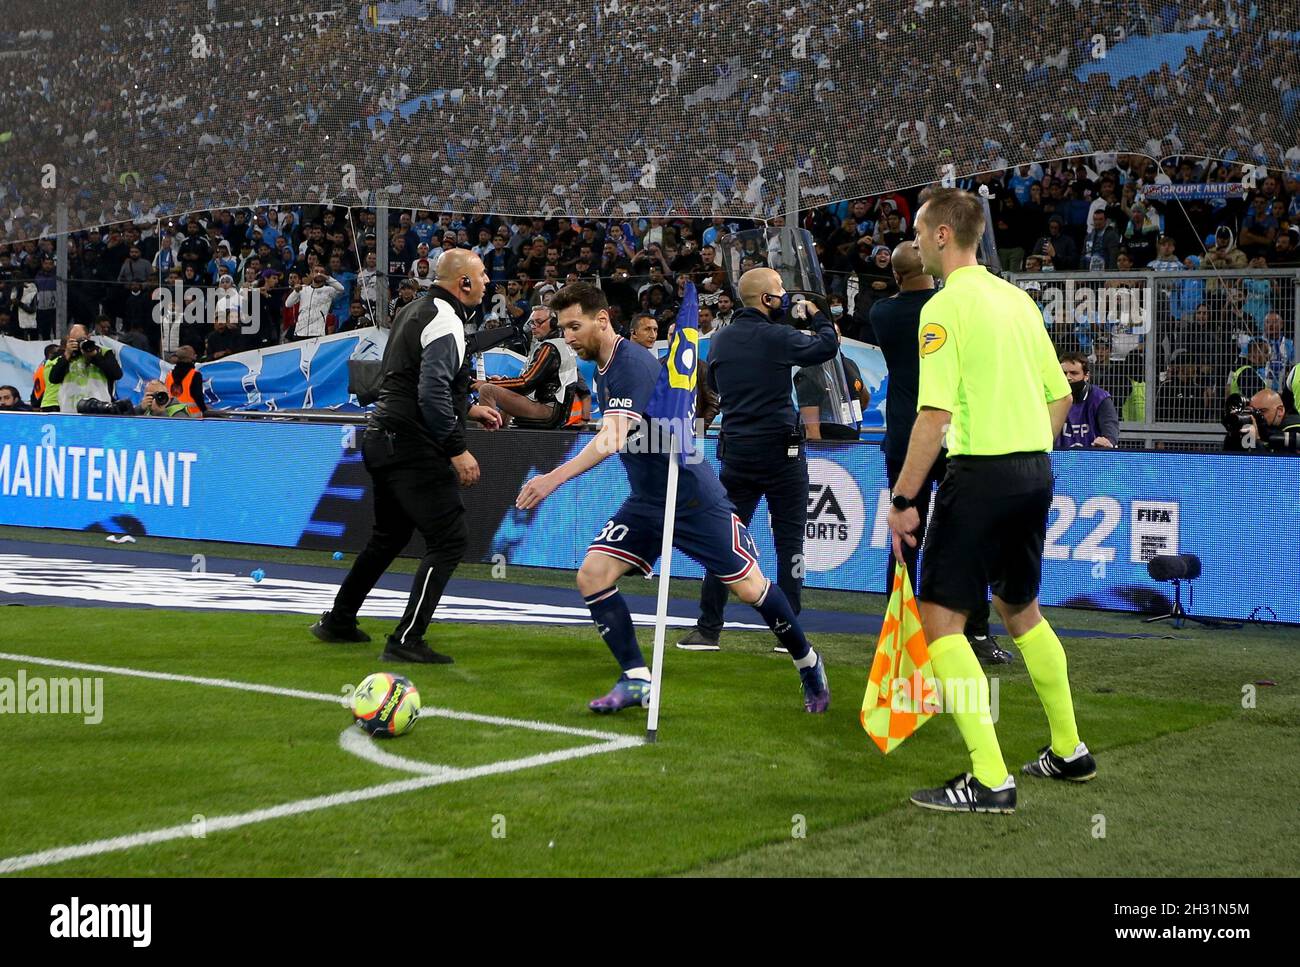 Lionel Messi of PSG is protected by security when shooting corner kicks  during the French championship Ligue 1 football match between Olympique de  Marseille (OM) and Paris Saint-Germain (PSG) on October 24,